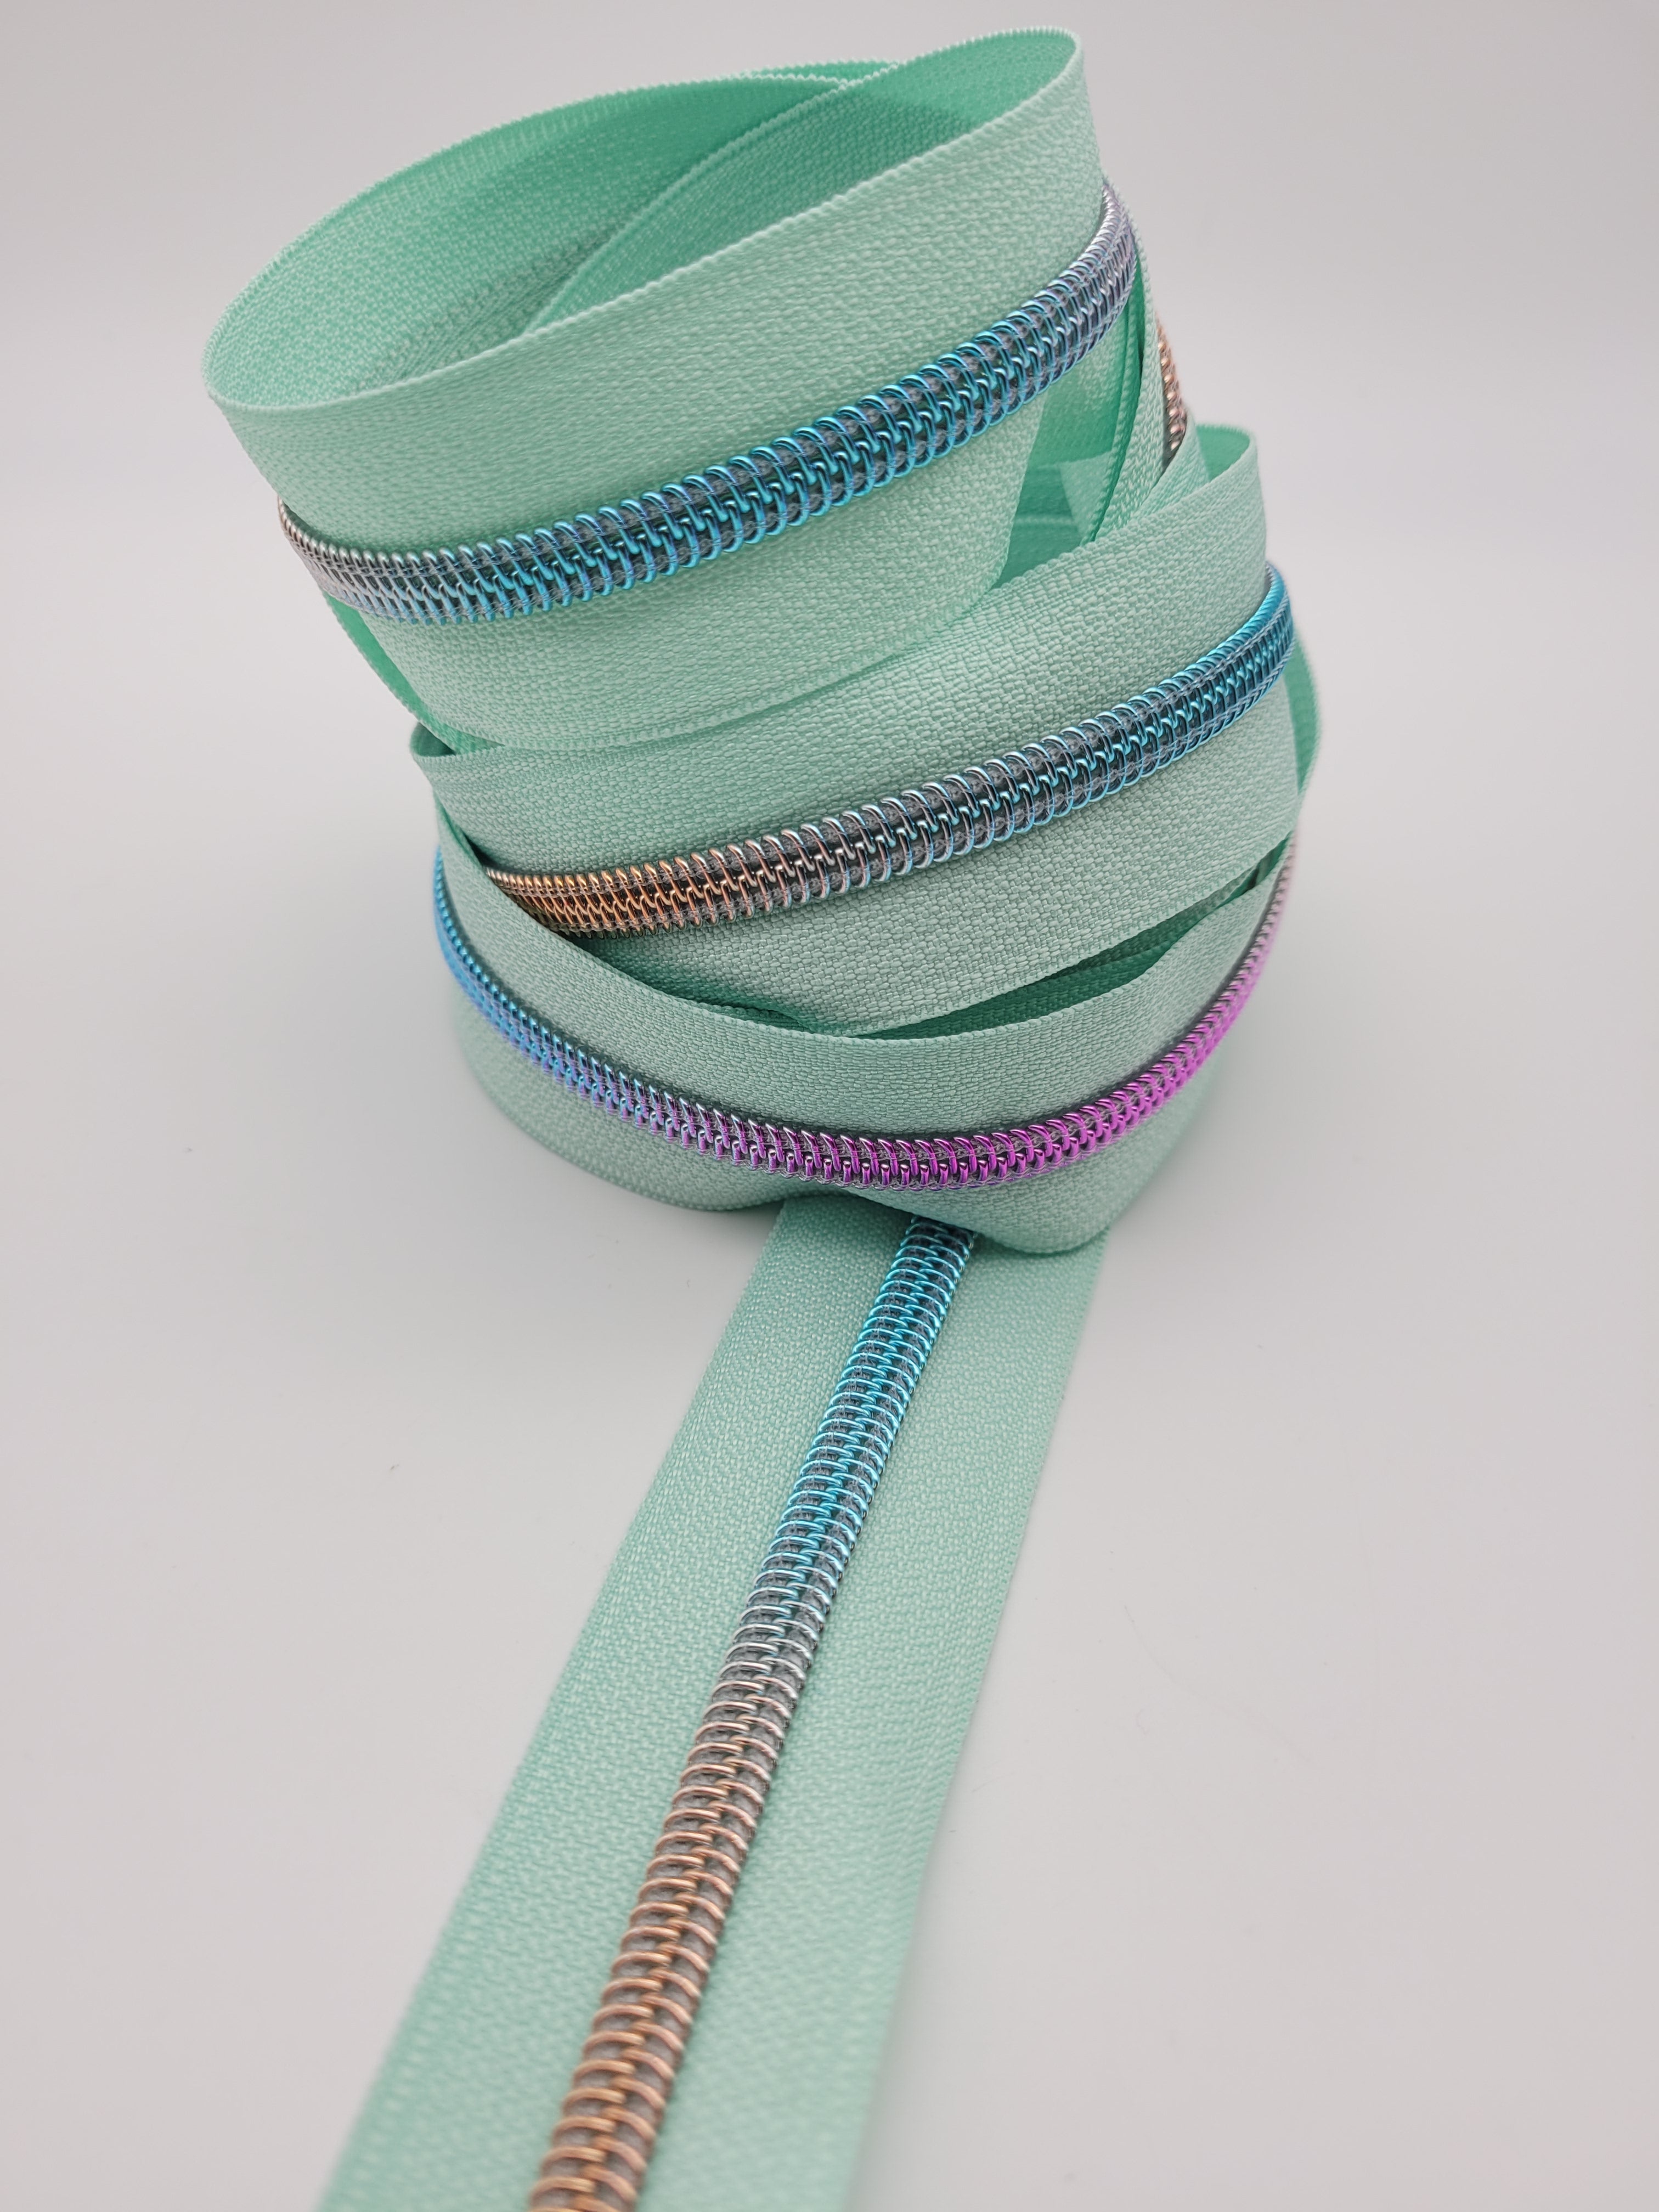 Cosmic Zipper Tape with Rainbow Coil (#5)